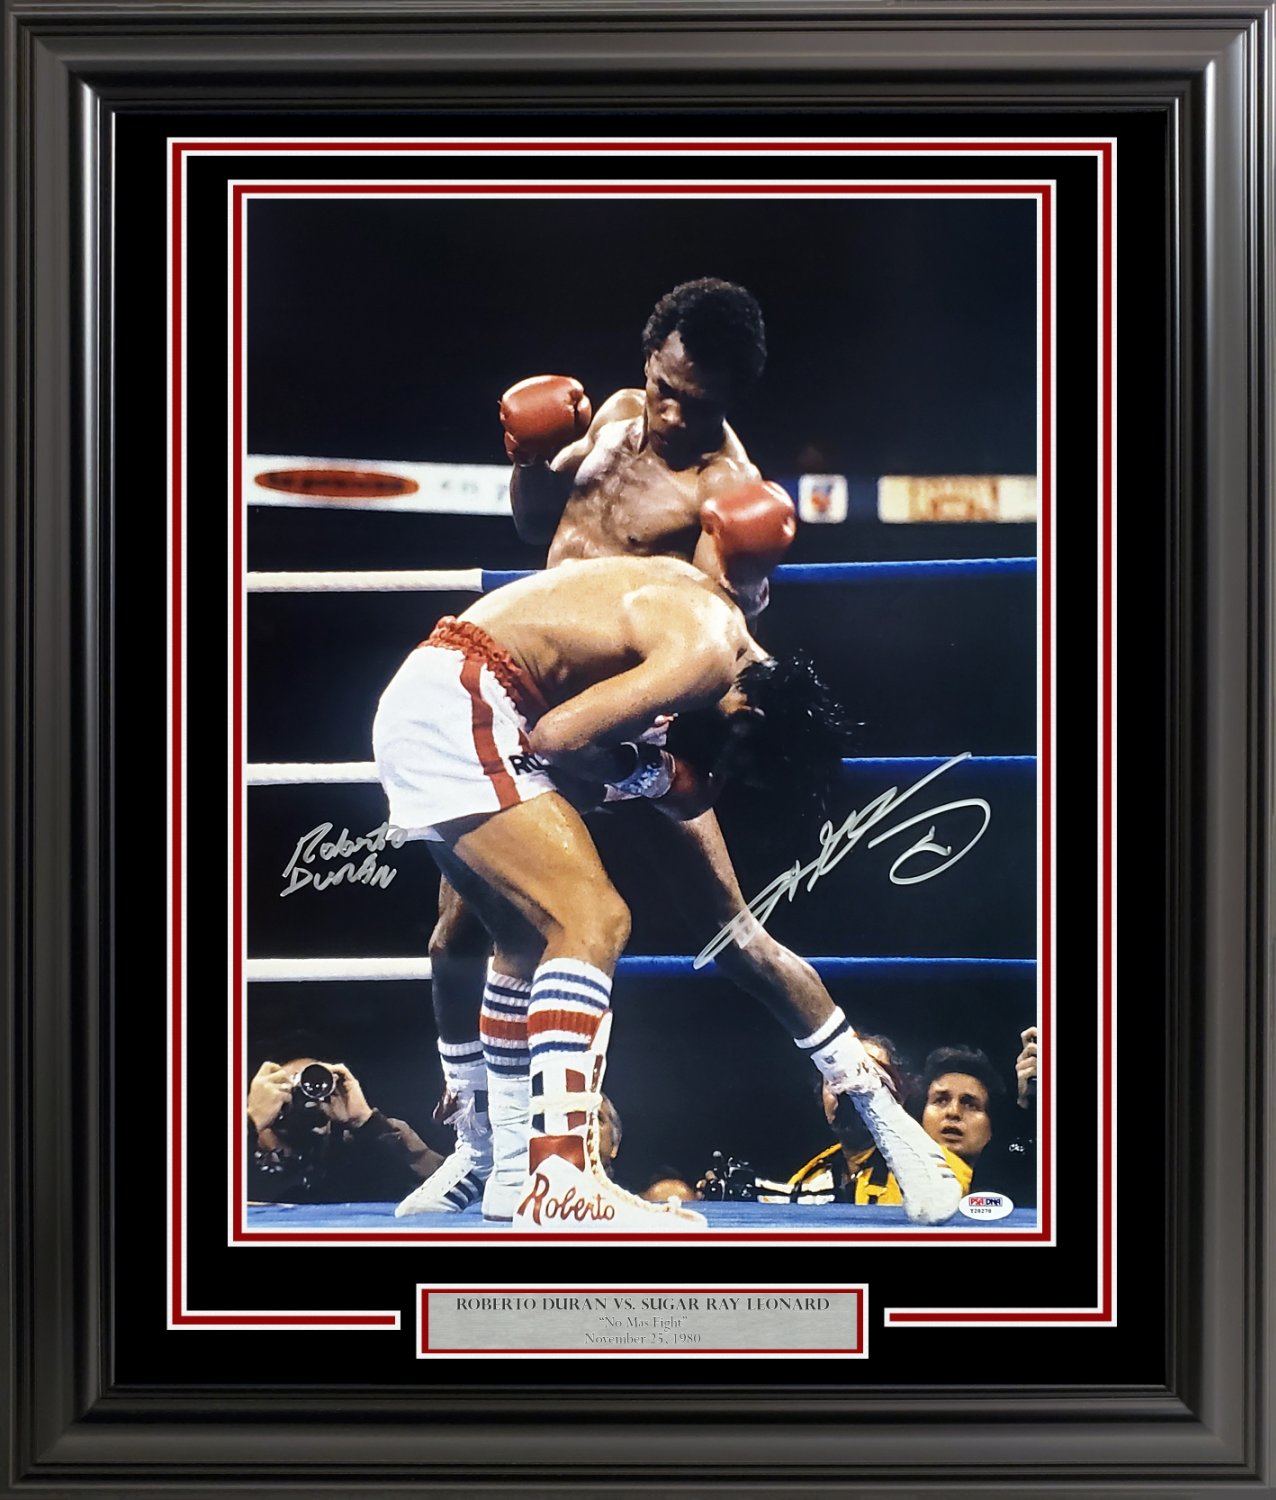 Signed Sugar Ray Leonard and Roberto Duran Autographed 16x20 Photo PSA/DNA Certified